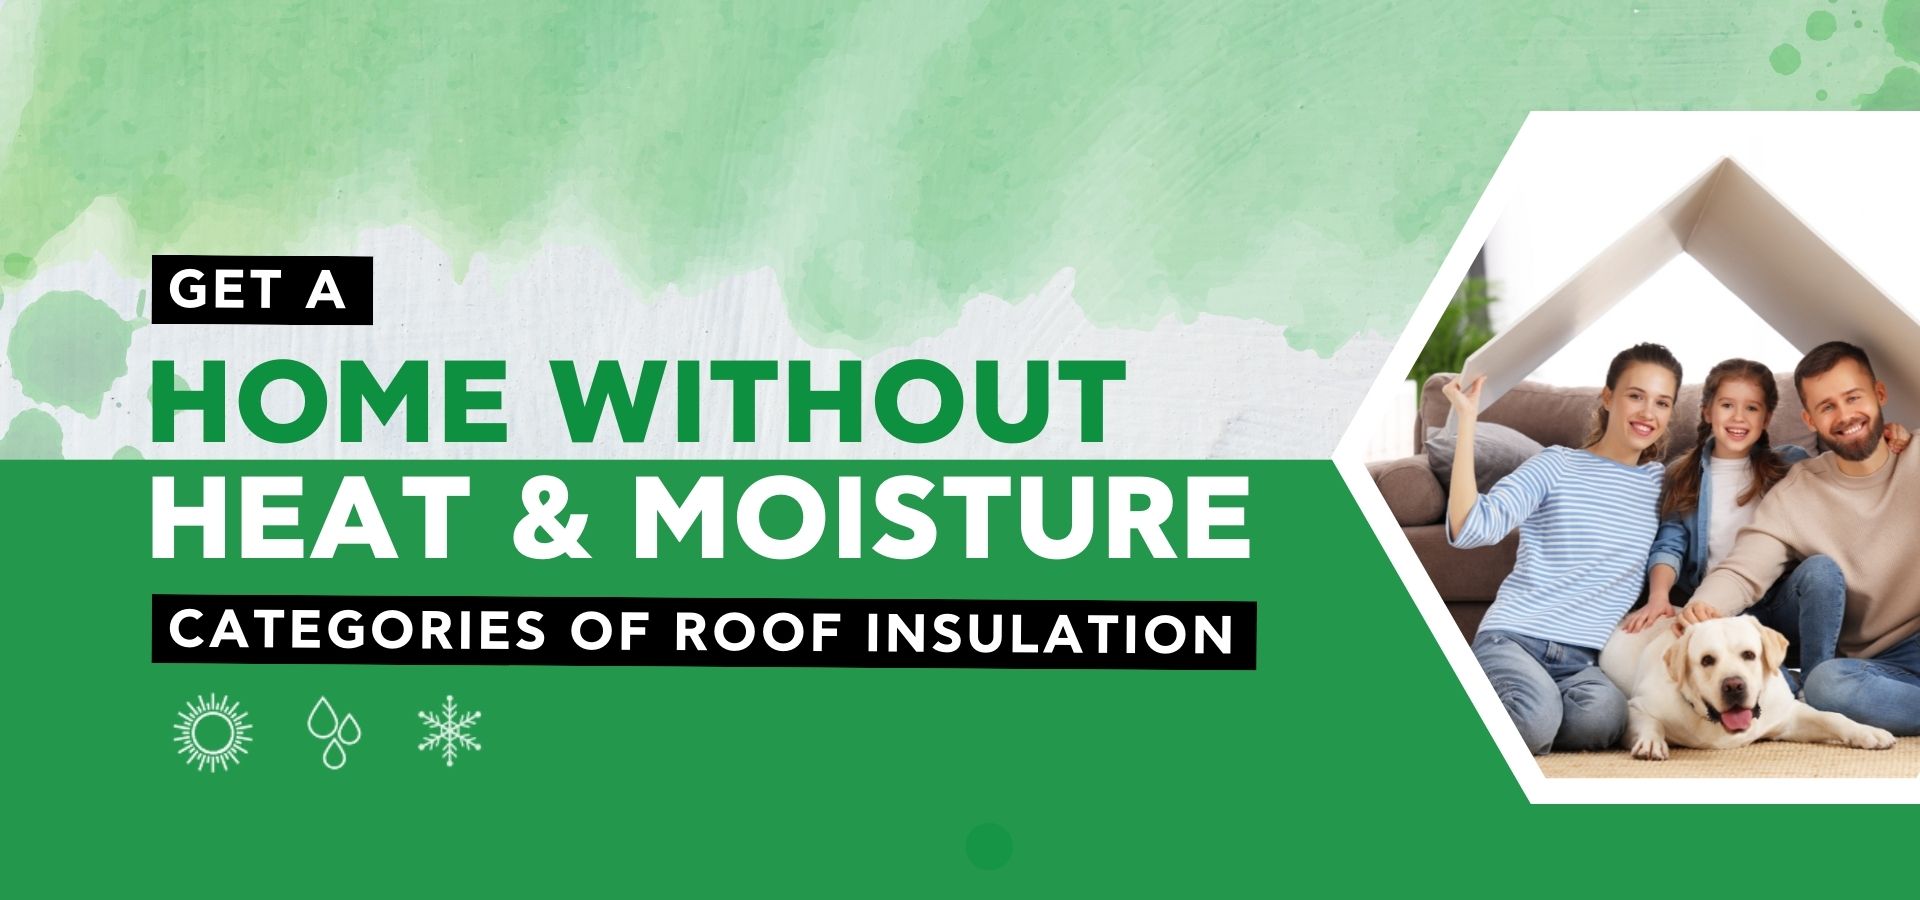 ROOF THERMAL INSULATION